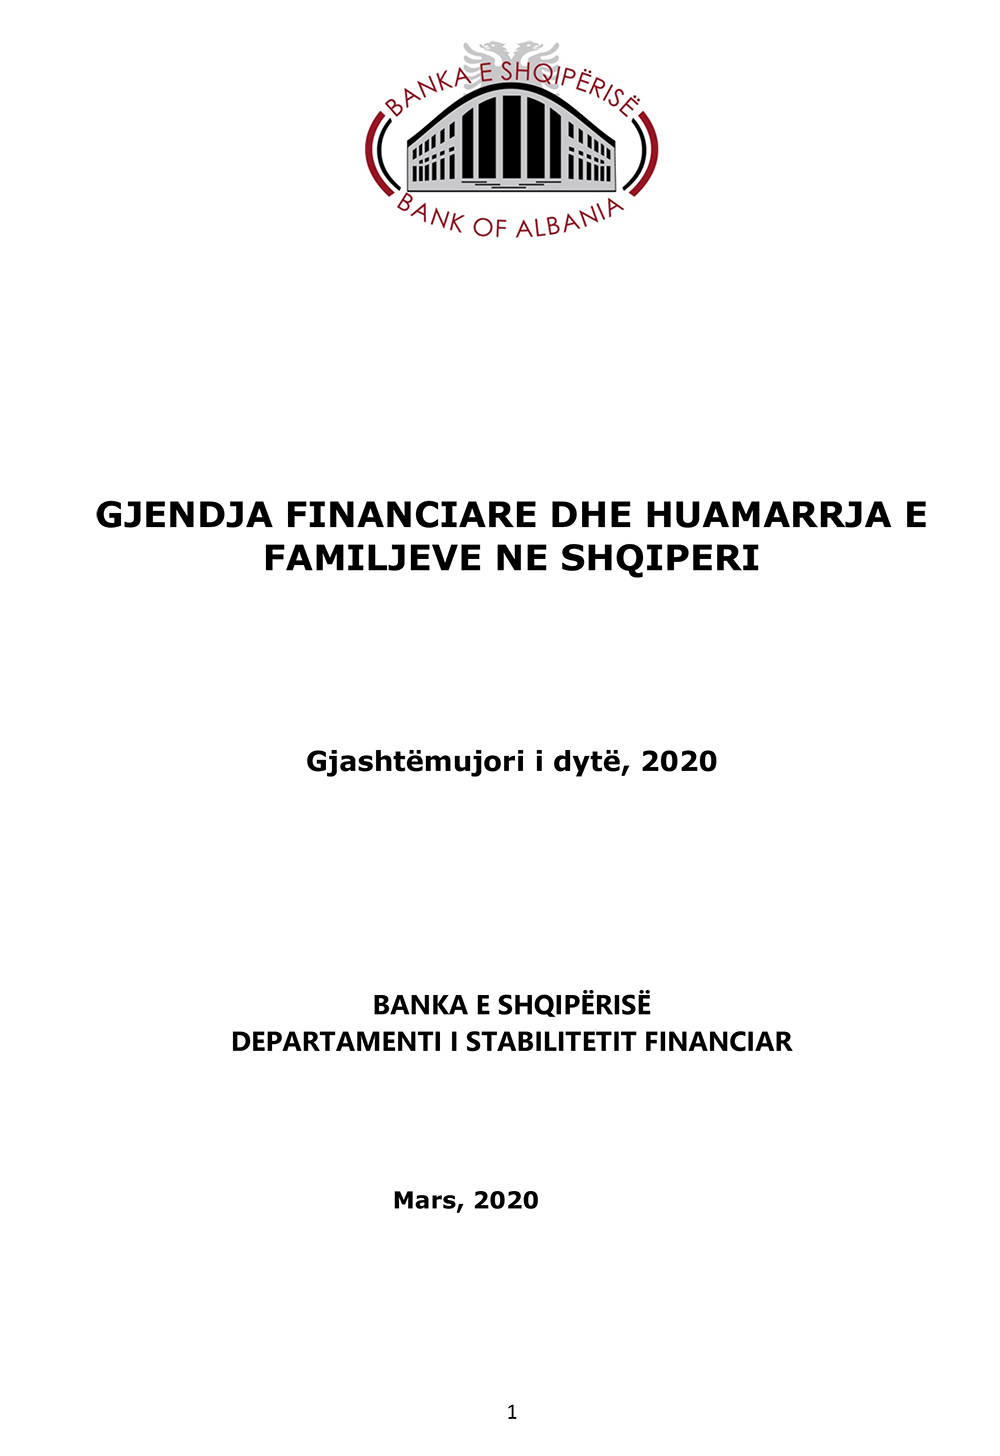 Survey on Financial Situation and Borrowing of Households in Albania- 2020 H2